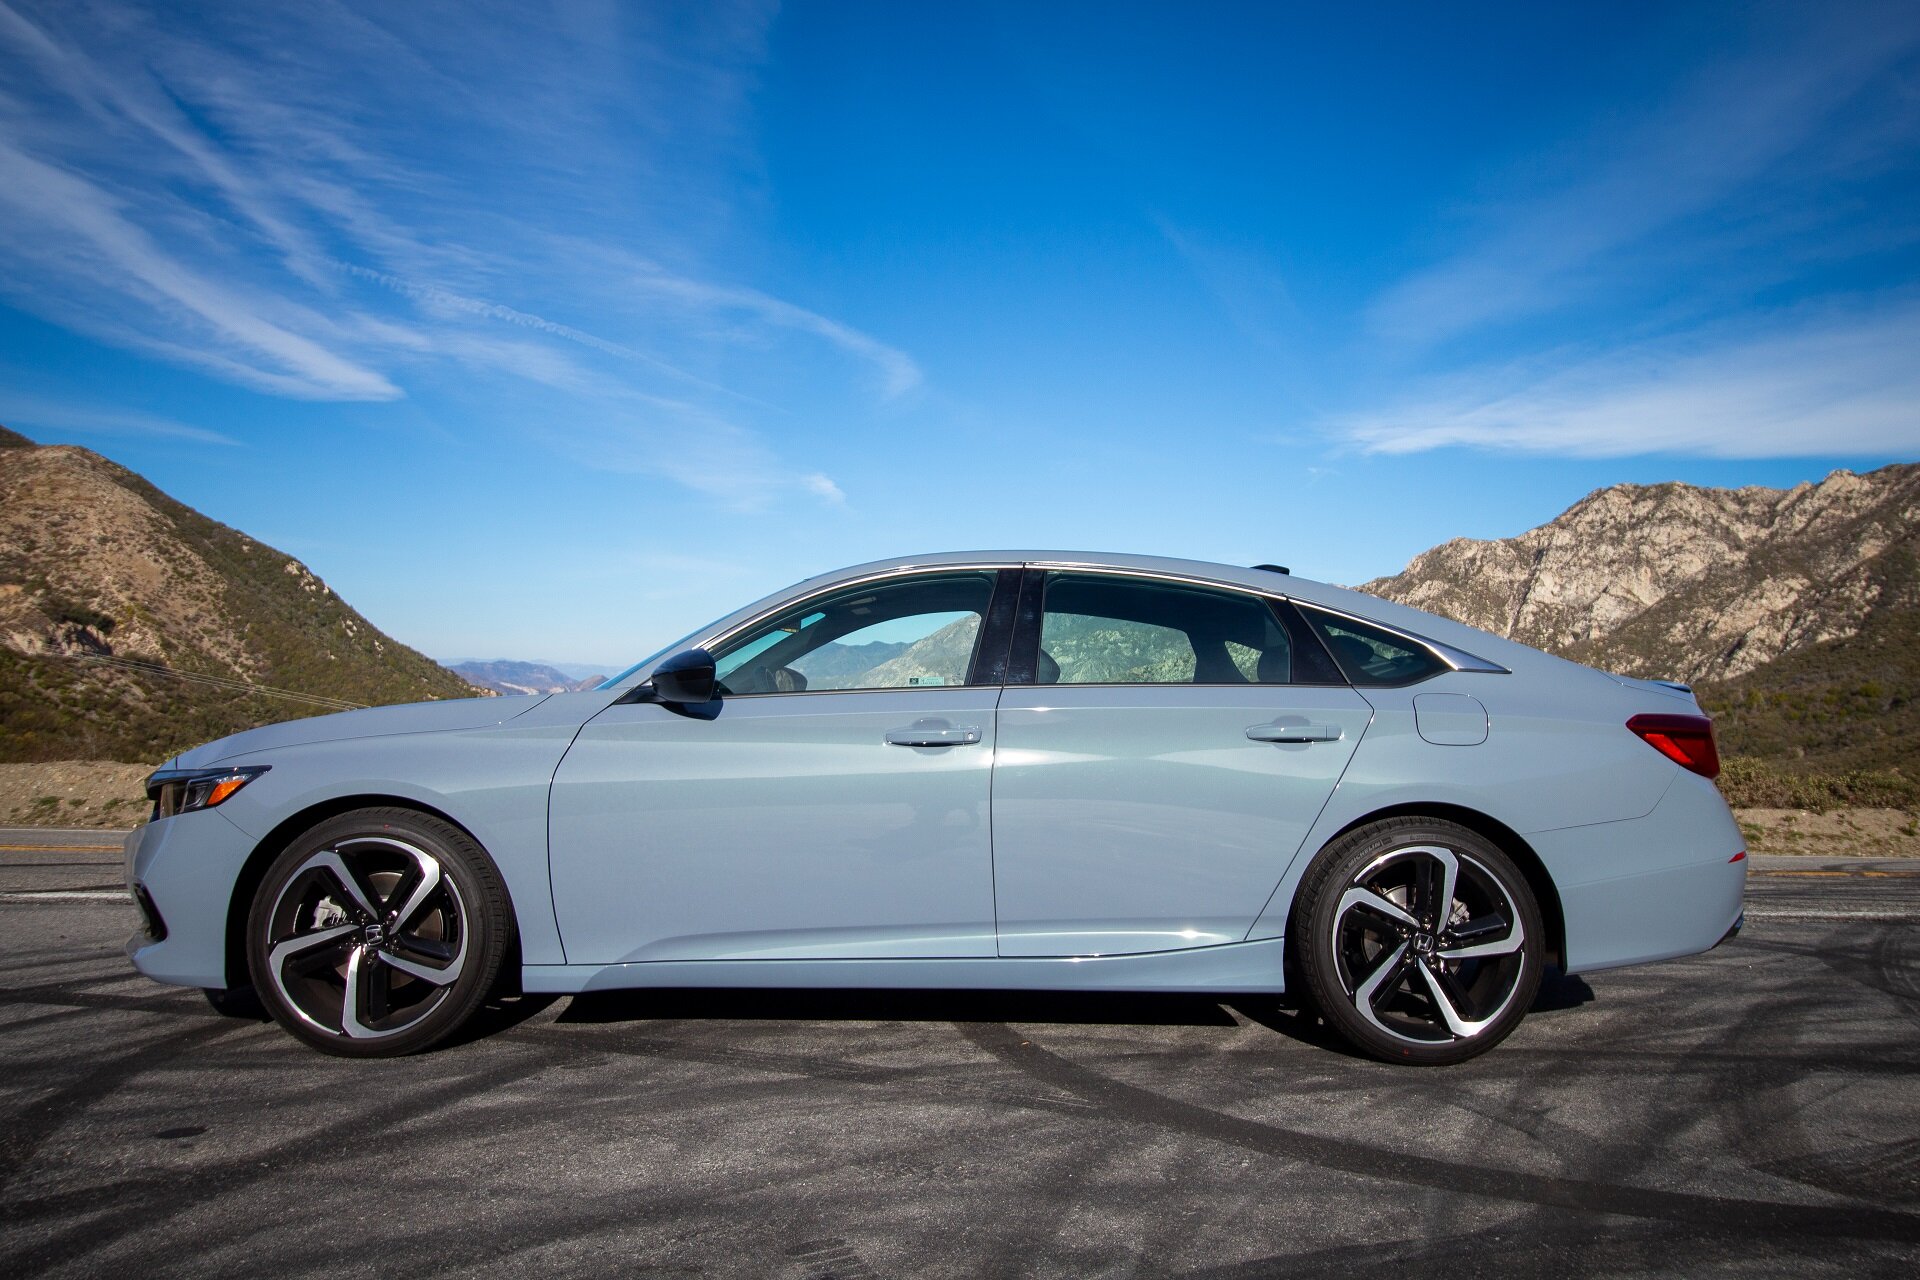 2021 Honda Accord 2.0T Sport Review: The Enthusiast's Choice? — Drive